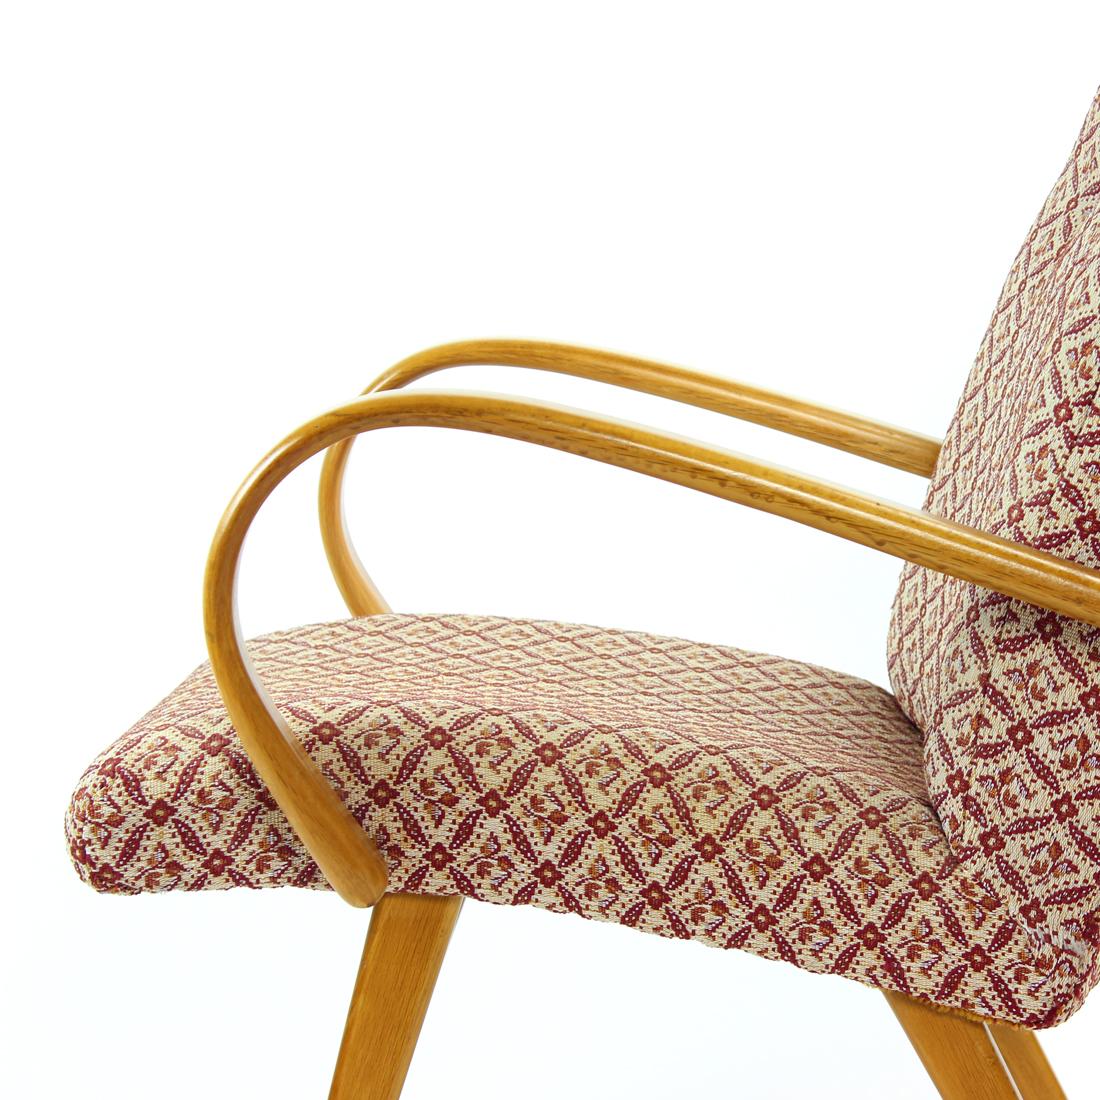 Beautiful Mid-century armchair with typical design for the era. Produced in Czechoslovakia by TON, original label still attached. The chair is partially restored with newly restored wooden parts. The chair shows beautiful design with smooth, bent